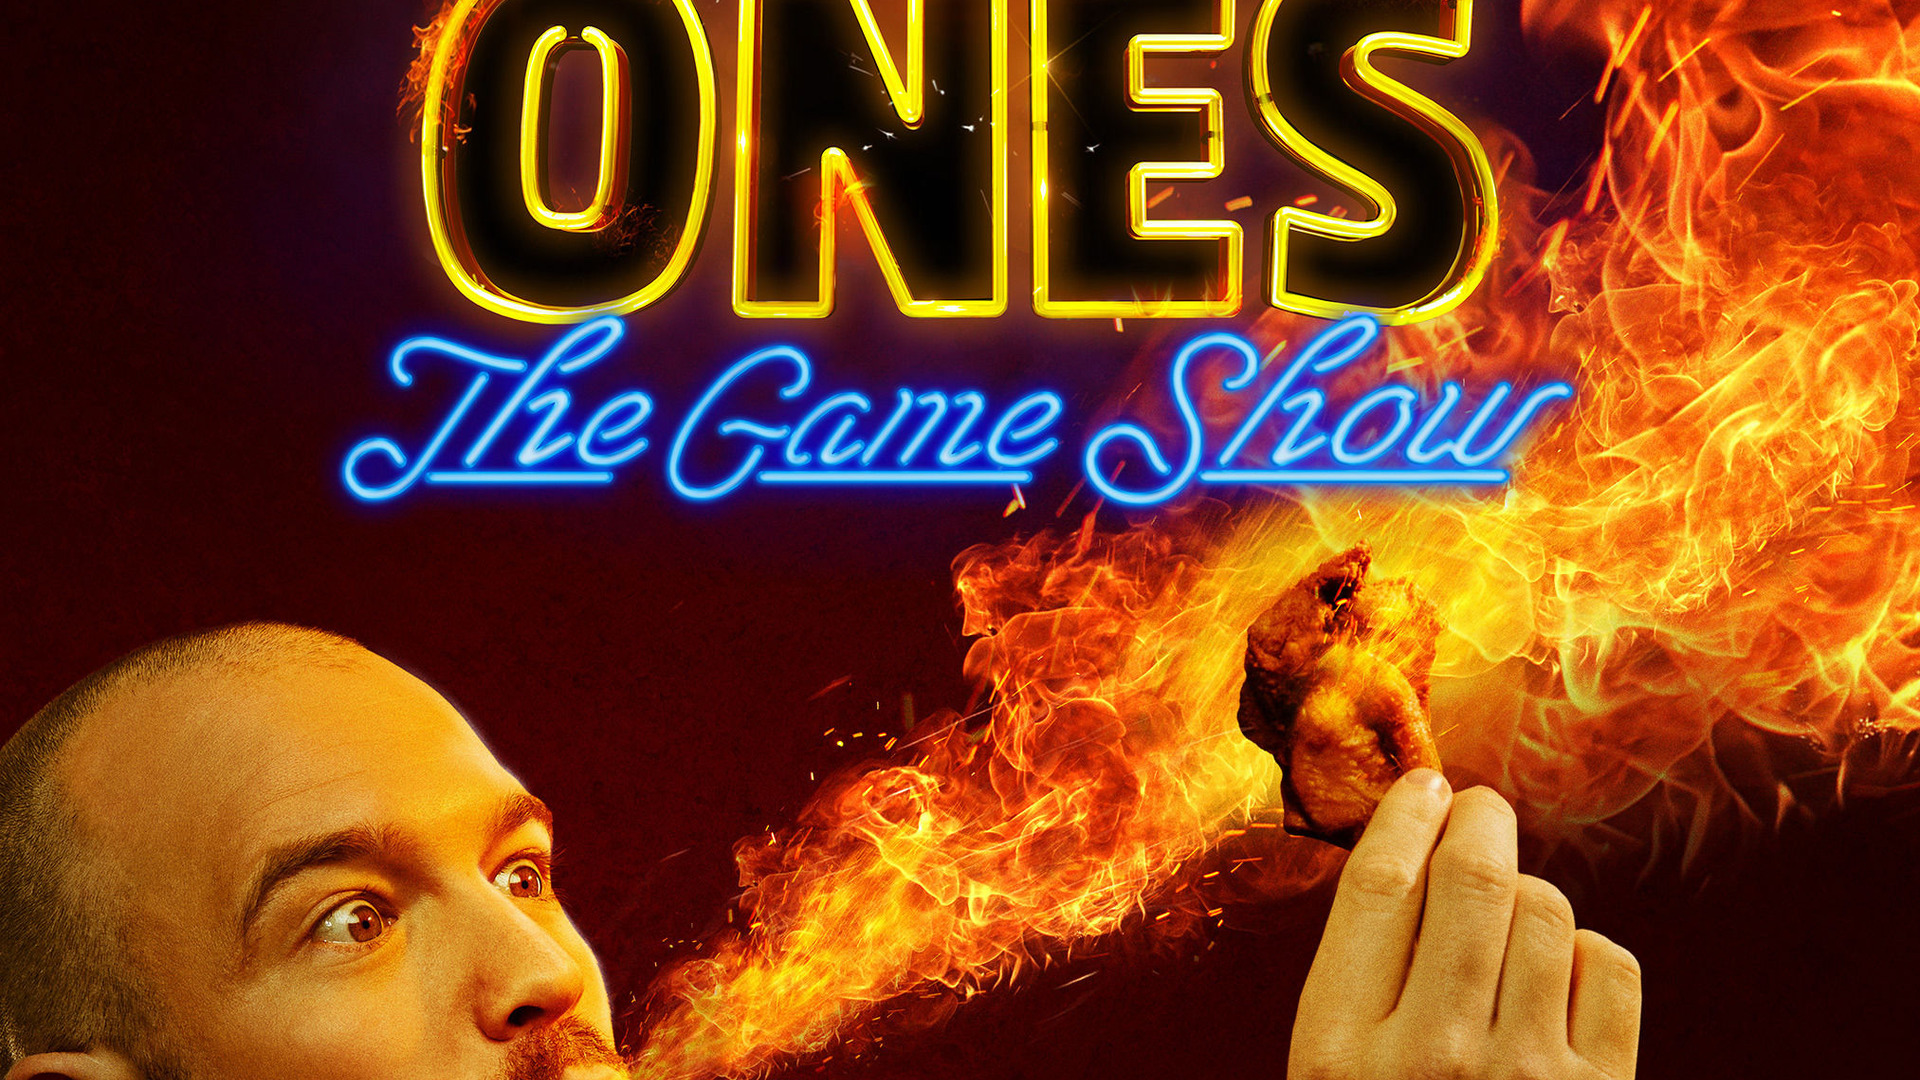 Show Hot Ones: The Game Show